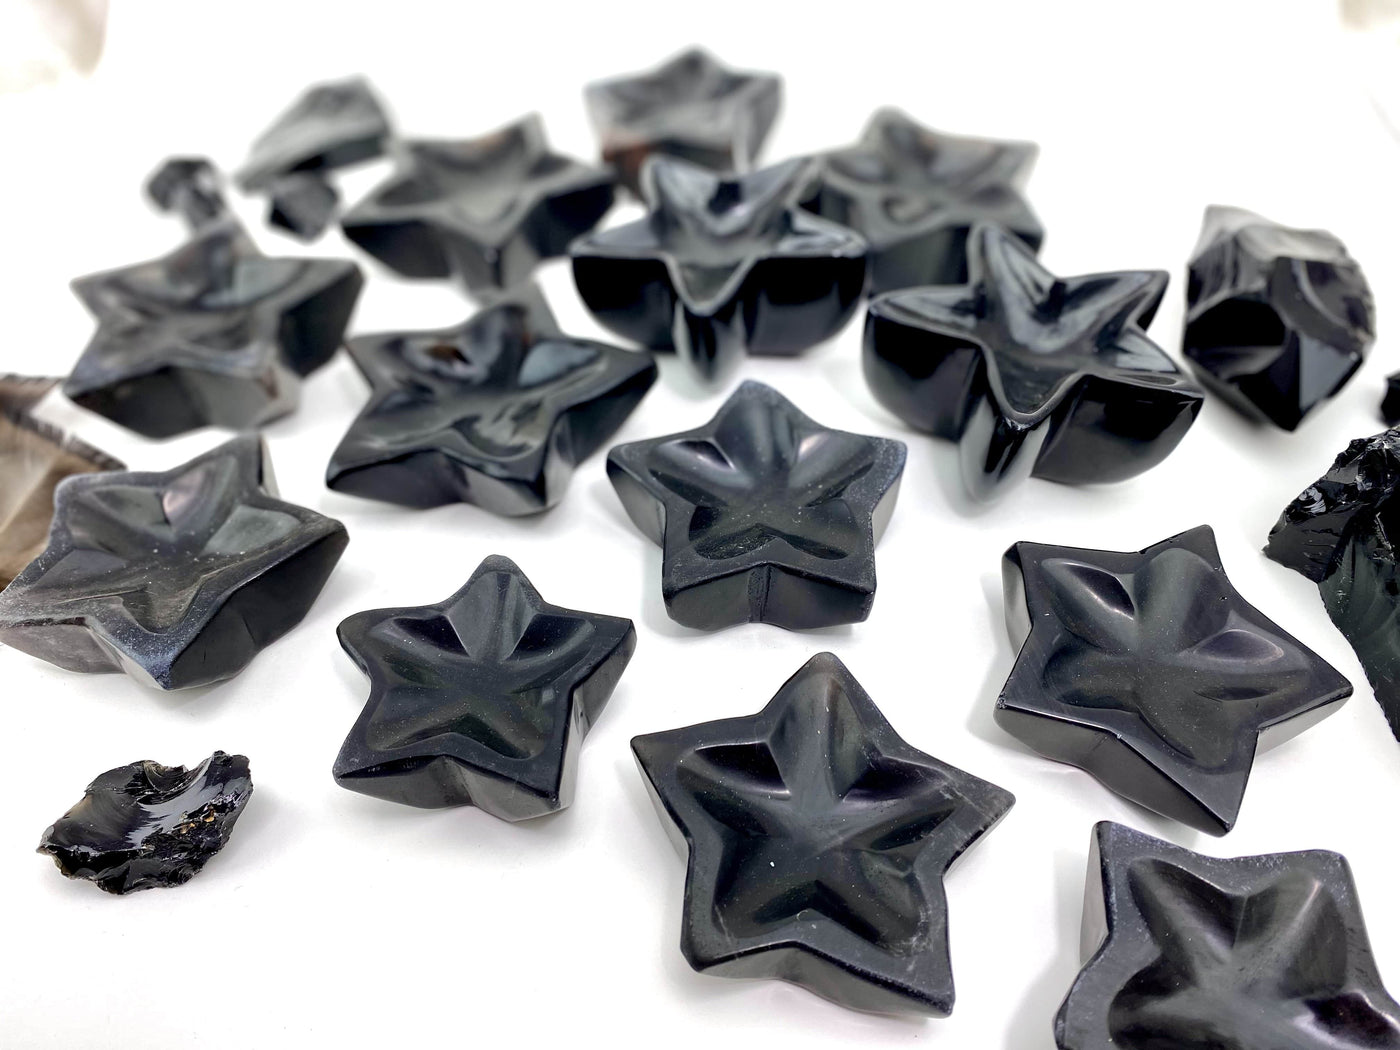 Black Obsidian Stone Star Dishes from a angle showing thickness